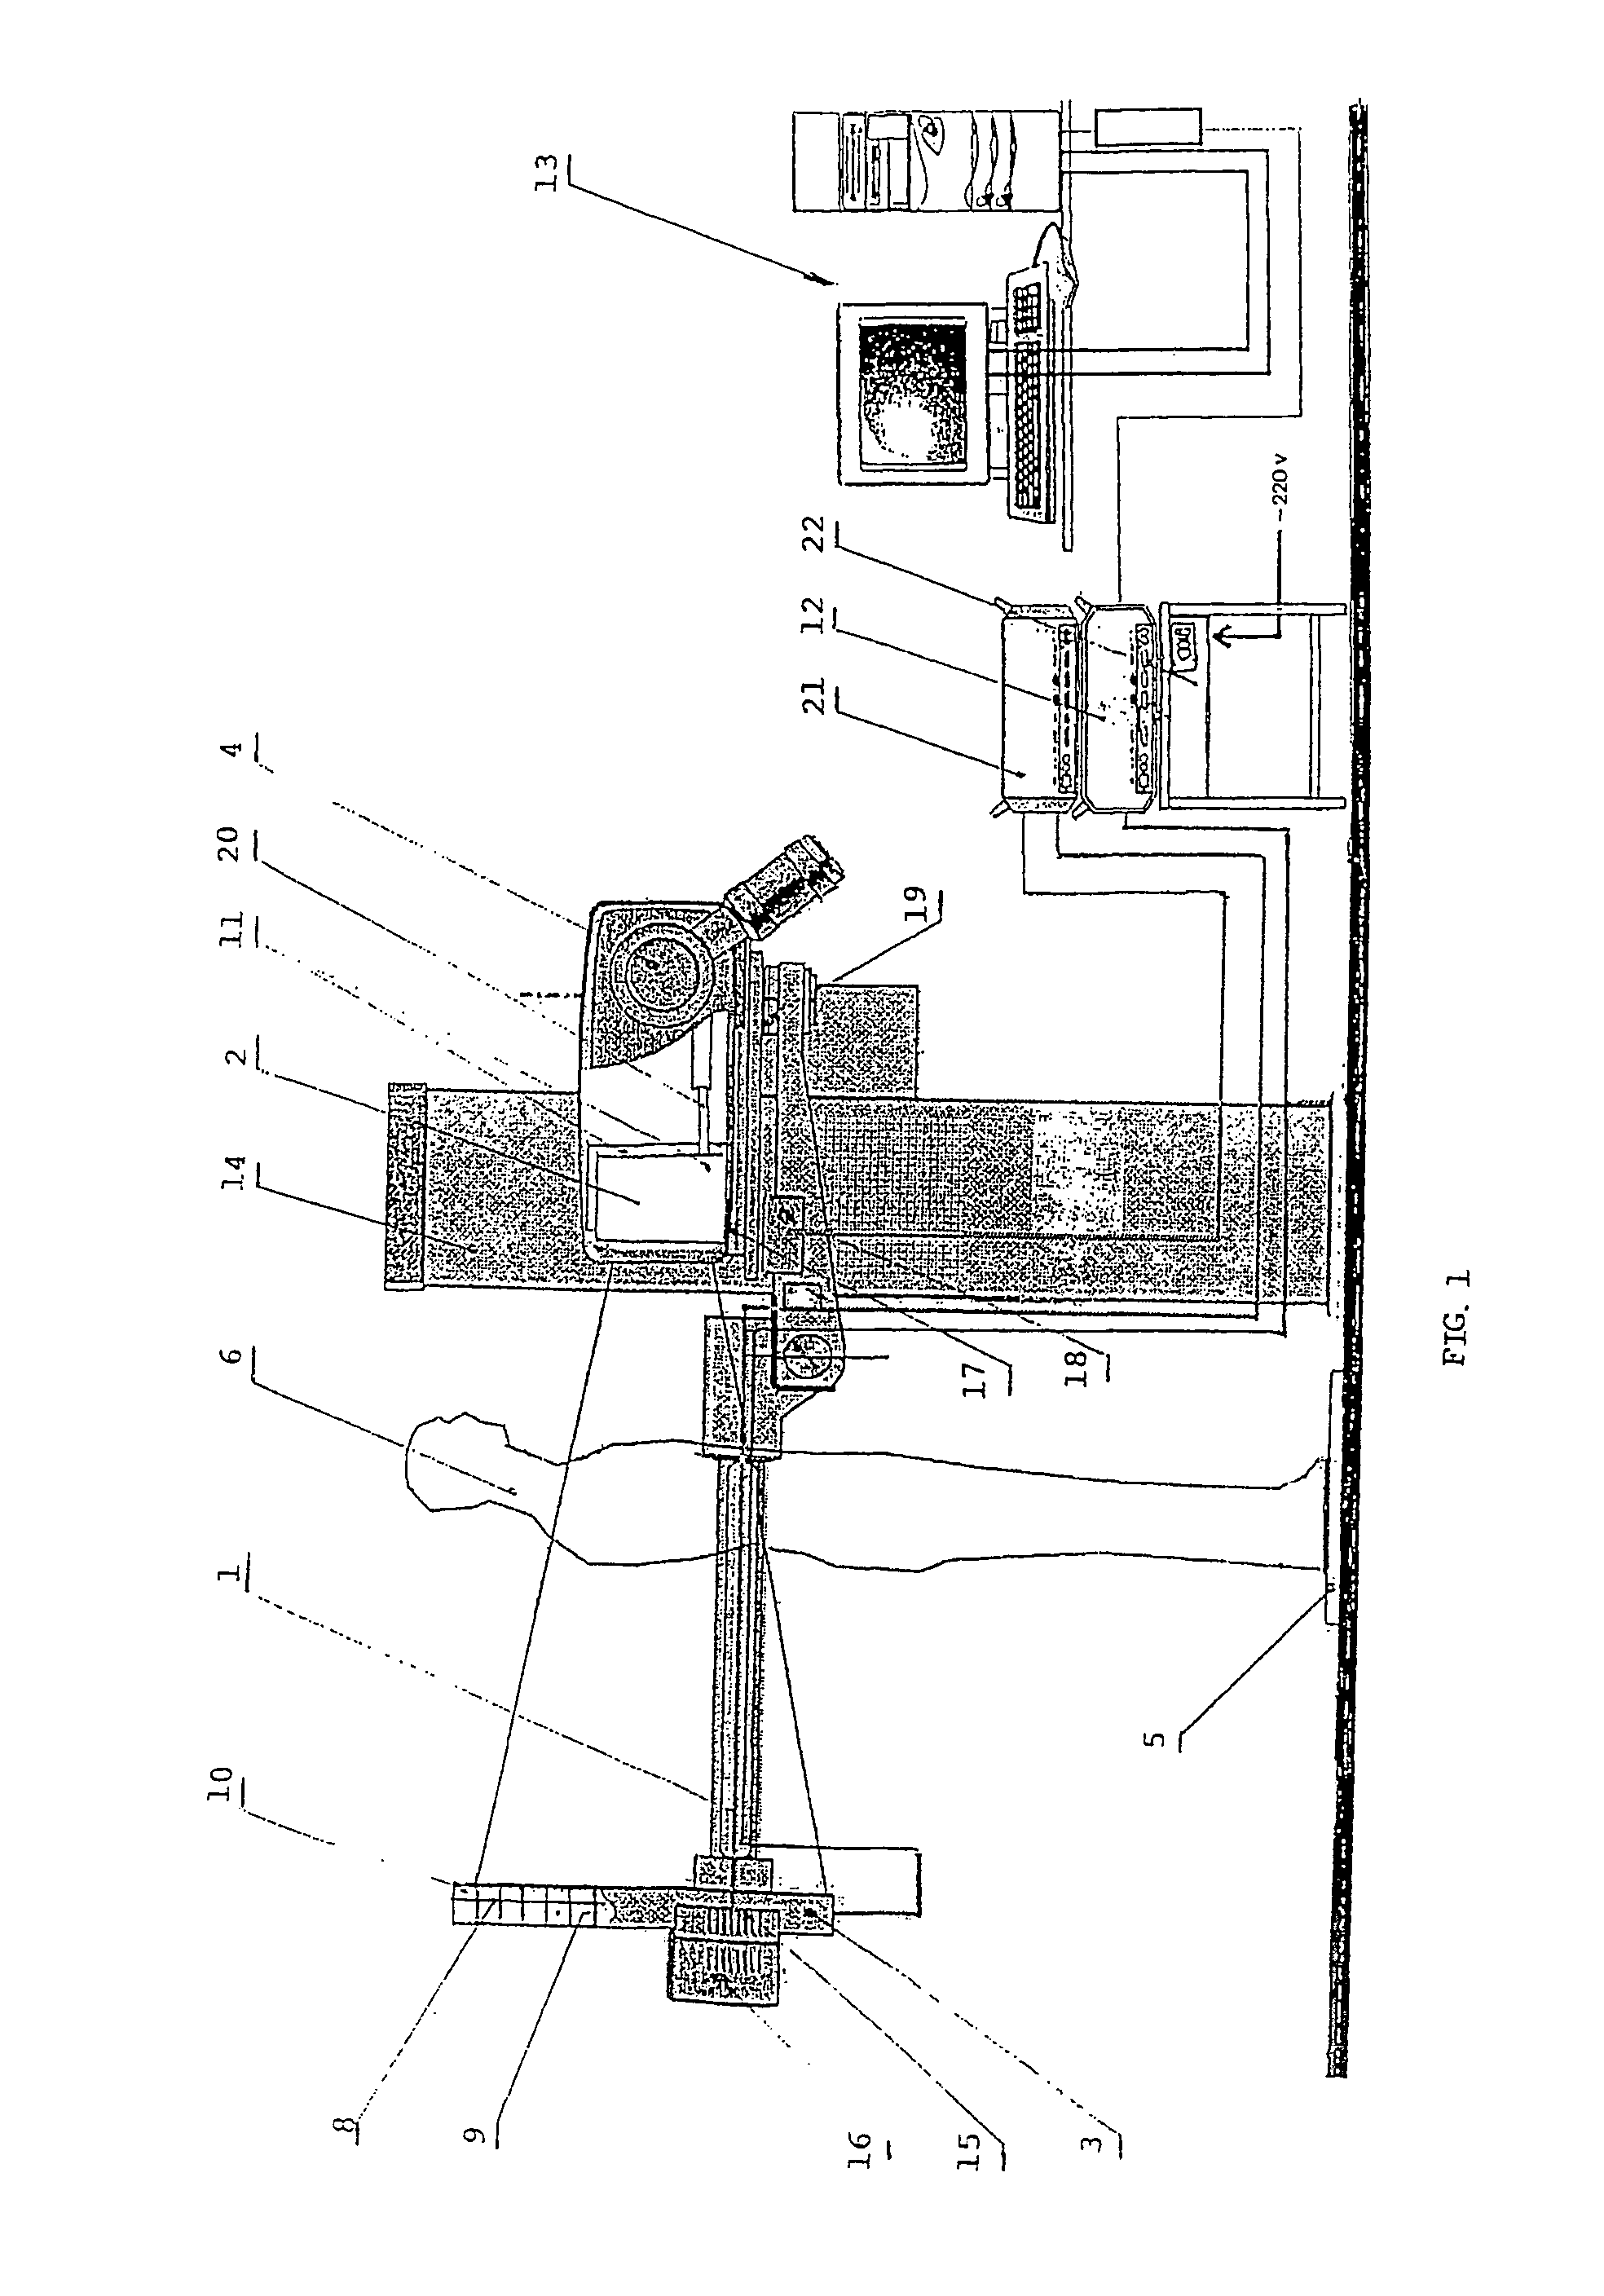 Method of body X-ray scanning, an apparatus for its implementation and a radiation detector (3 version) thereof